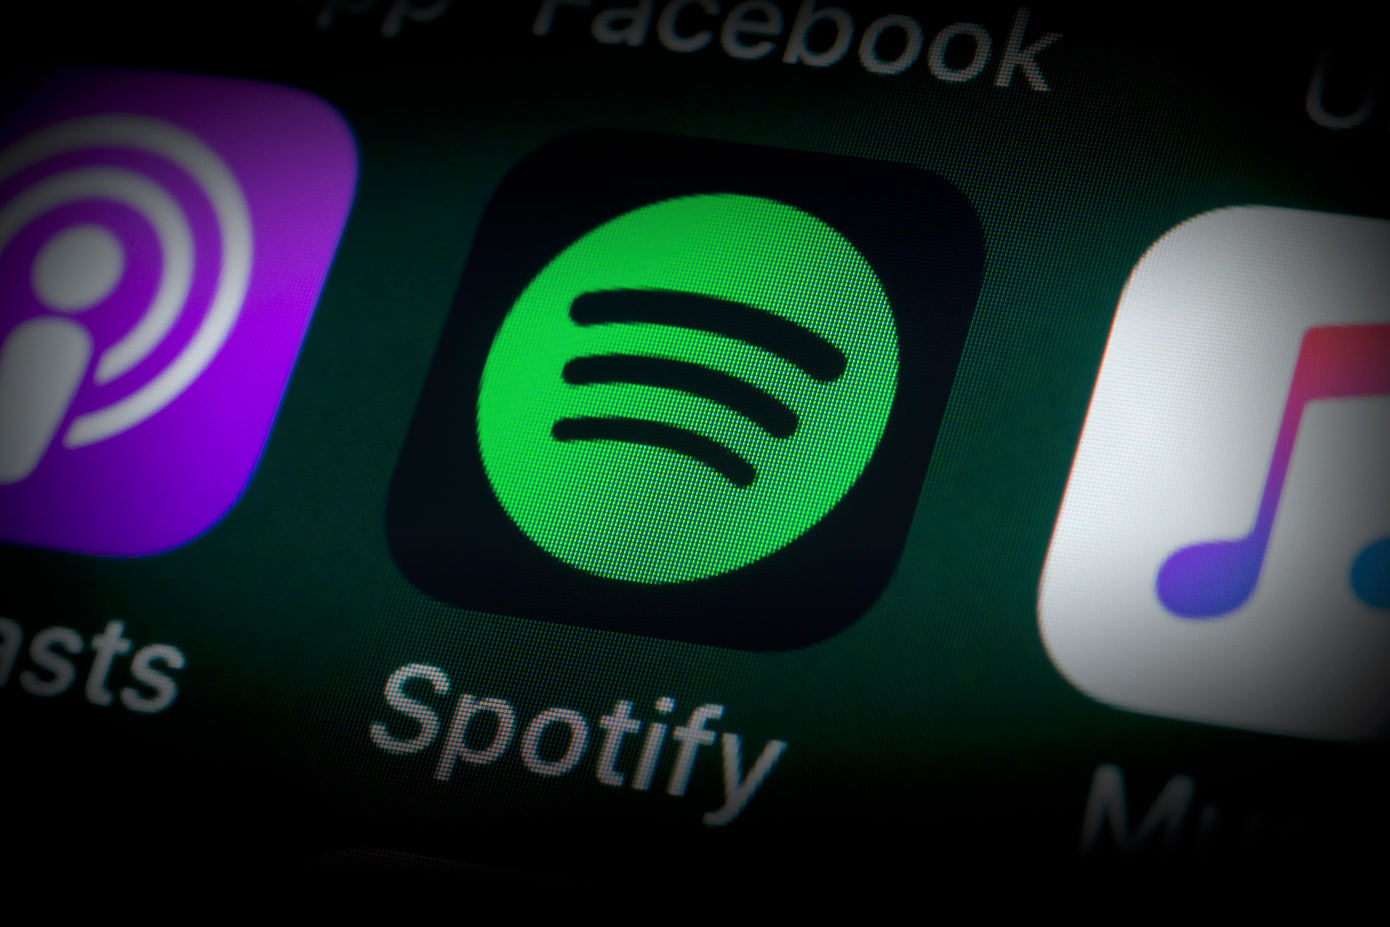 Spotify claims that live audio content is the next “History.”